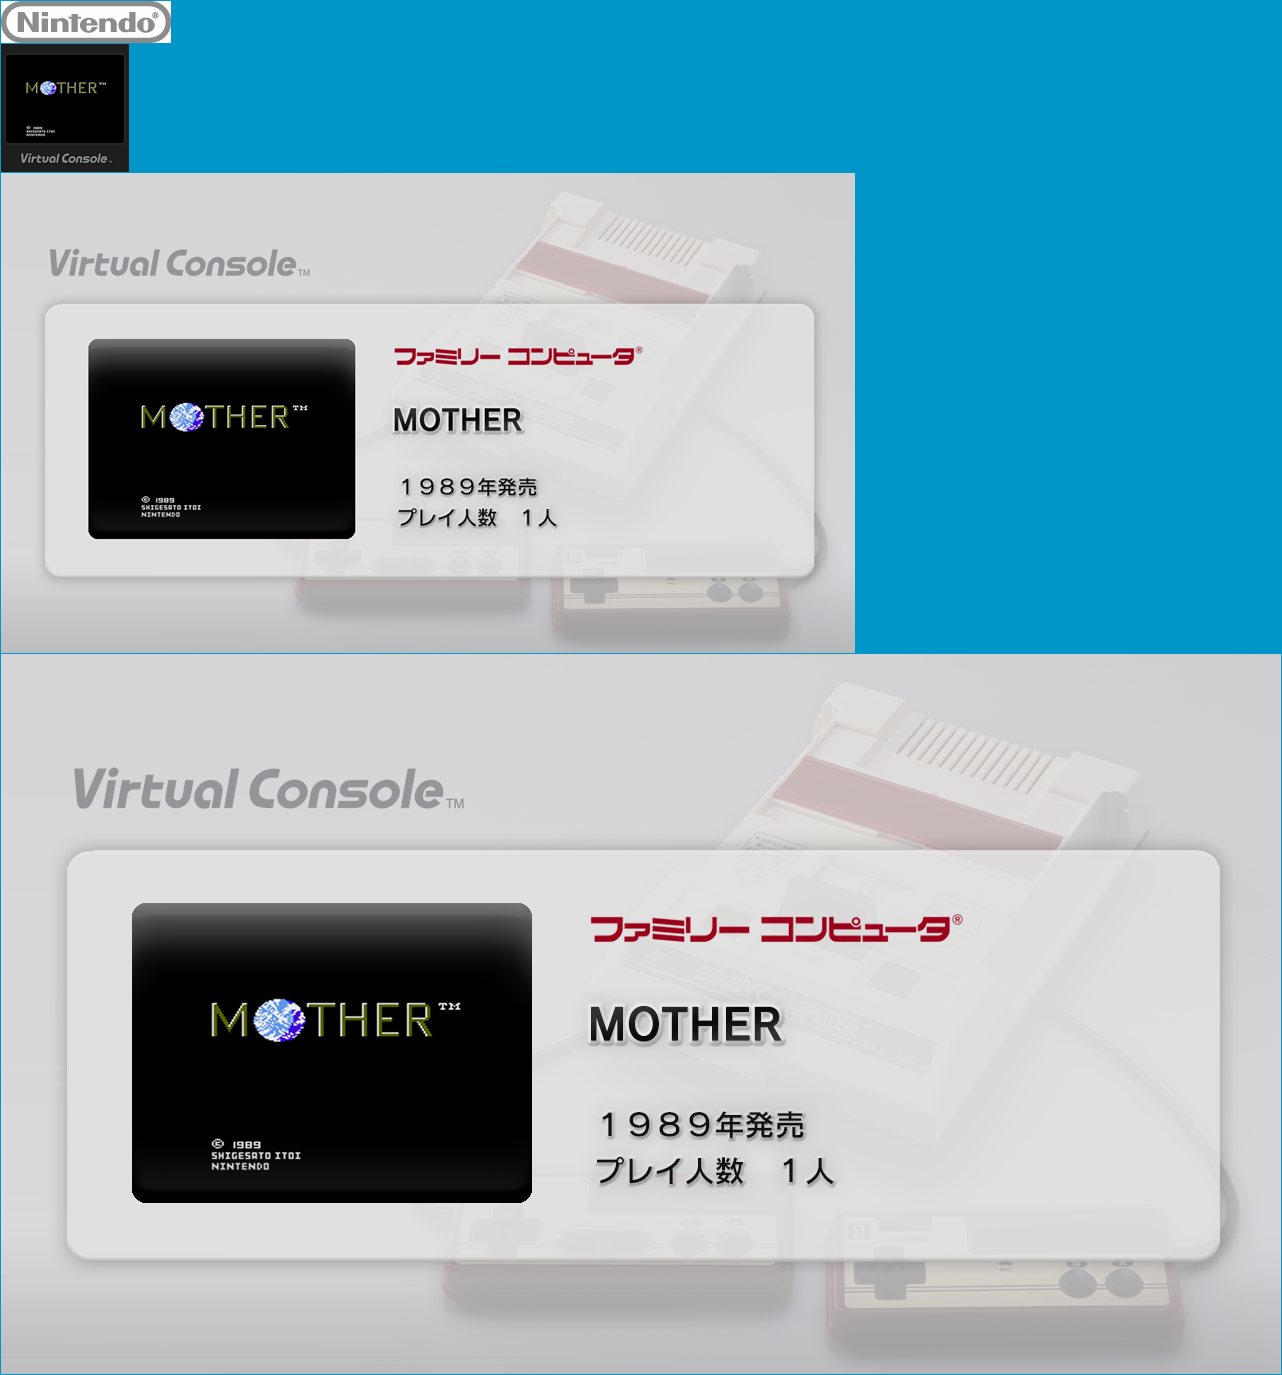 Virtual Console - MOTHER